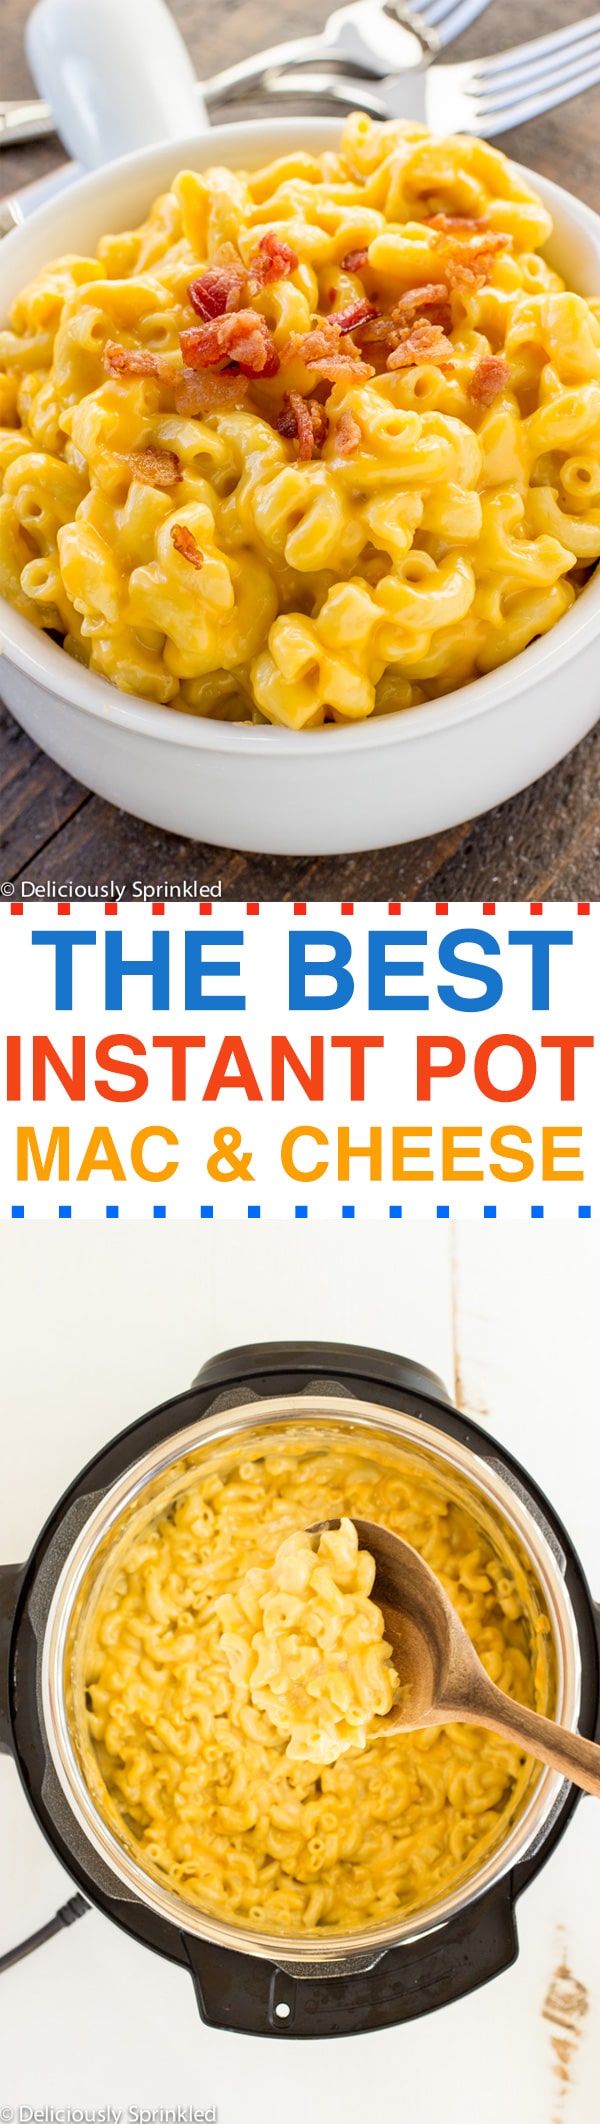 THE BEST INSTANT POT MAC & CHEESE RECIPE